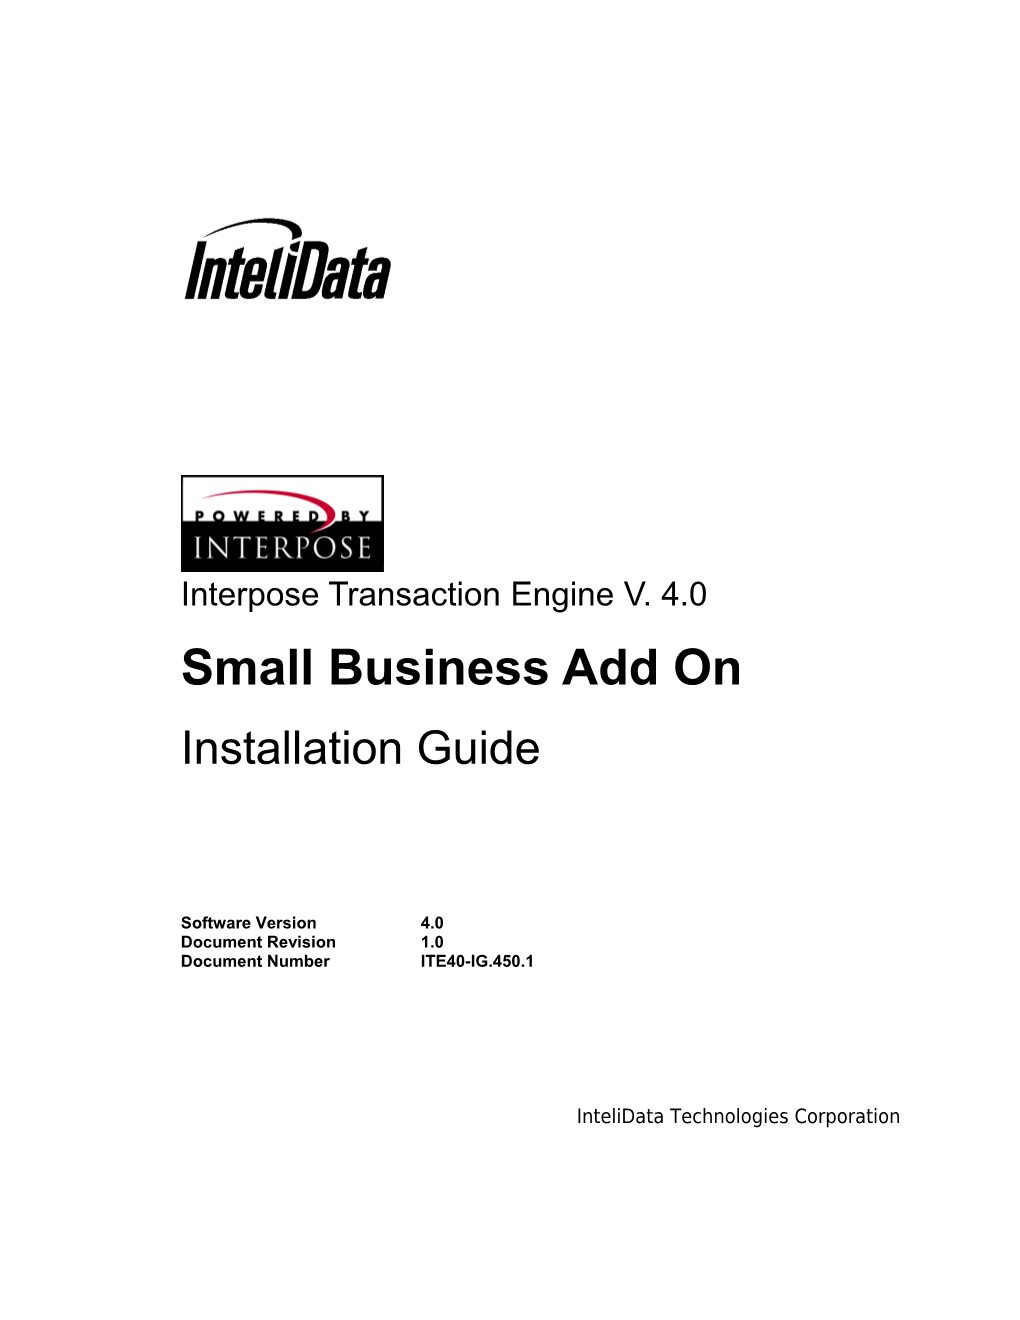 Small Business Add on Installation Guide